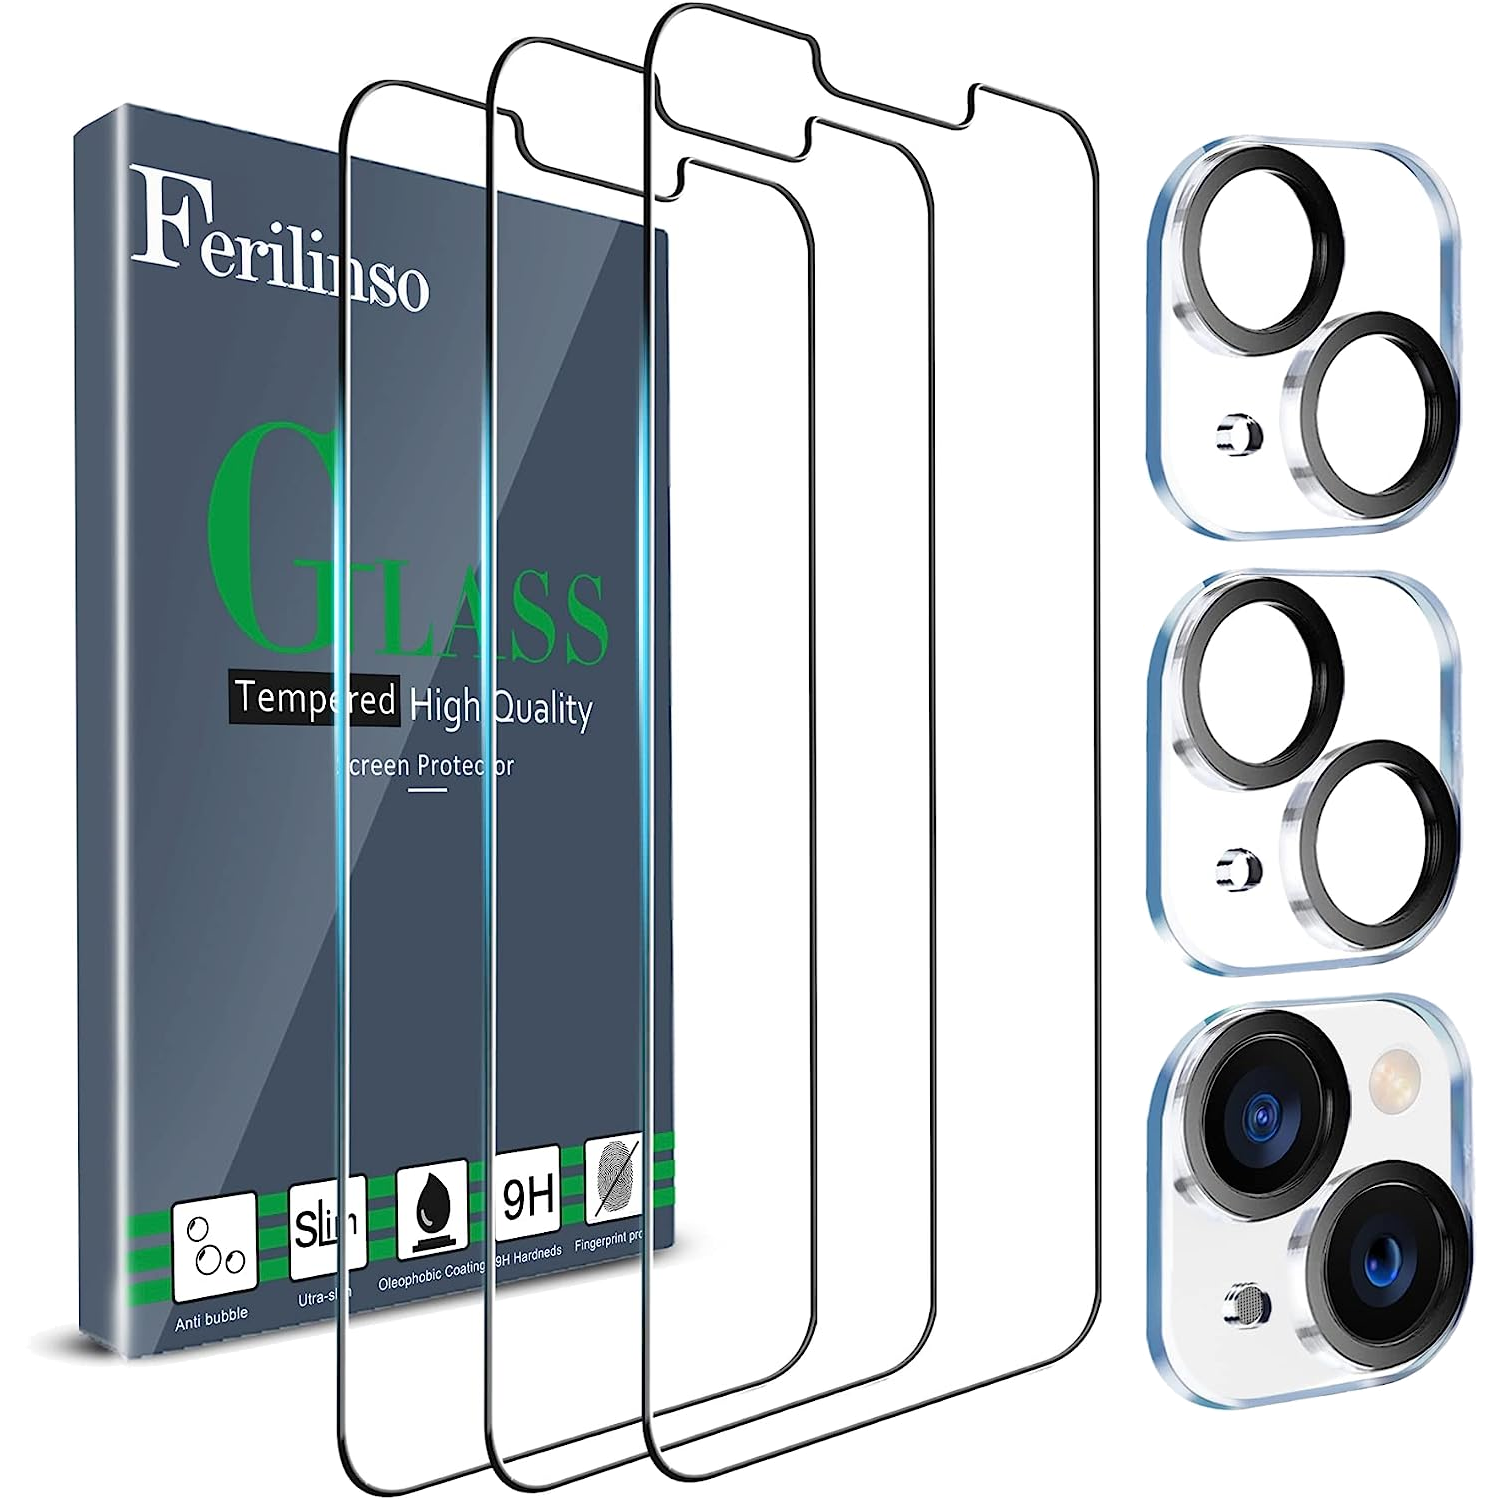 The Ferilinso Screen Protector for iPhone 13 Mini box with three screen protectors lined up next to it and three camera covers stacked vertically next to the screen protectors.